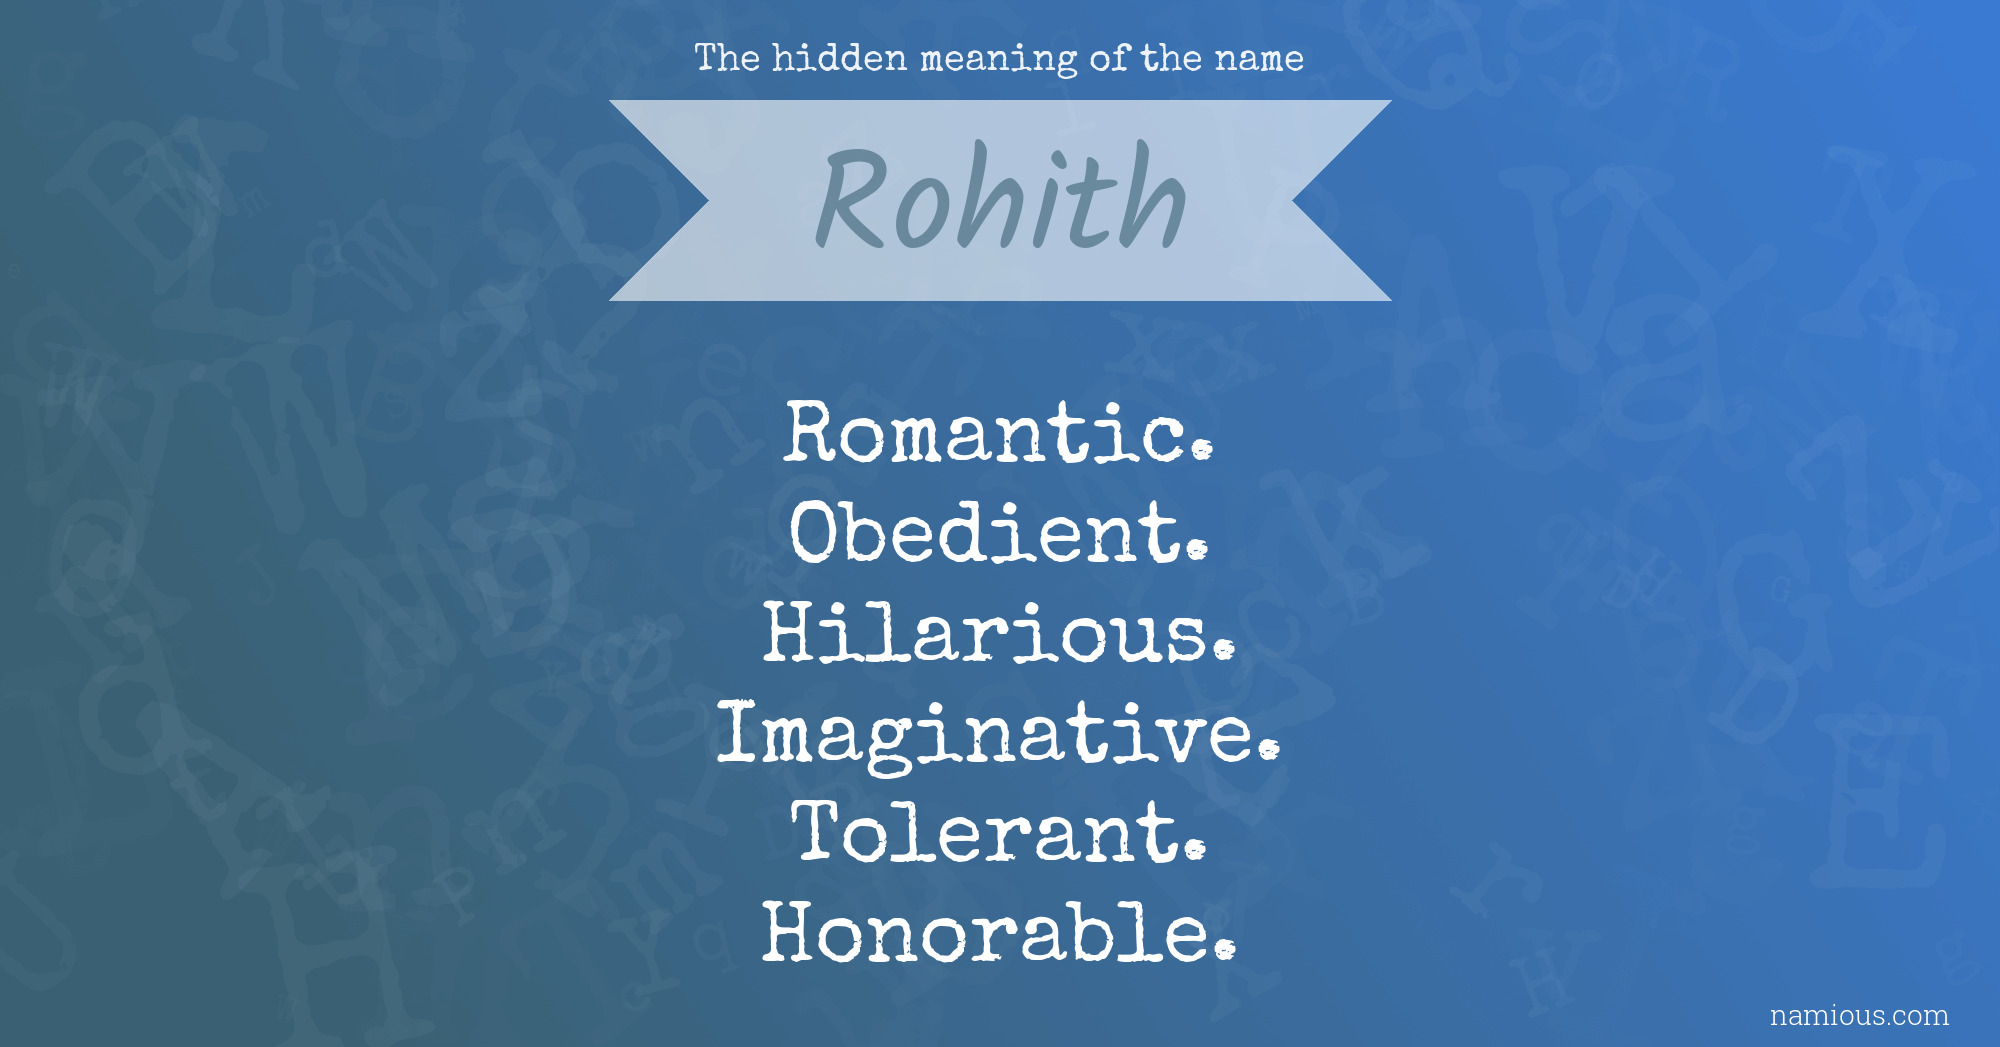 The hidden meaning of the name Rohith